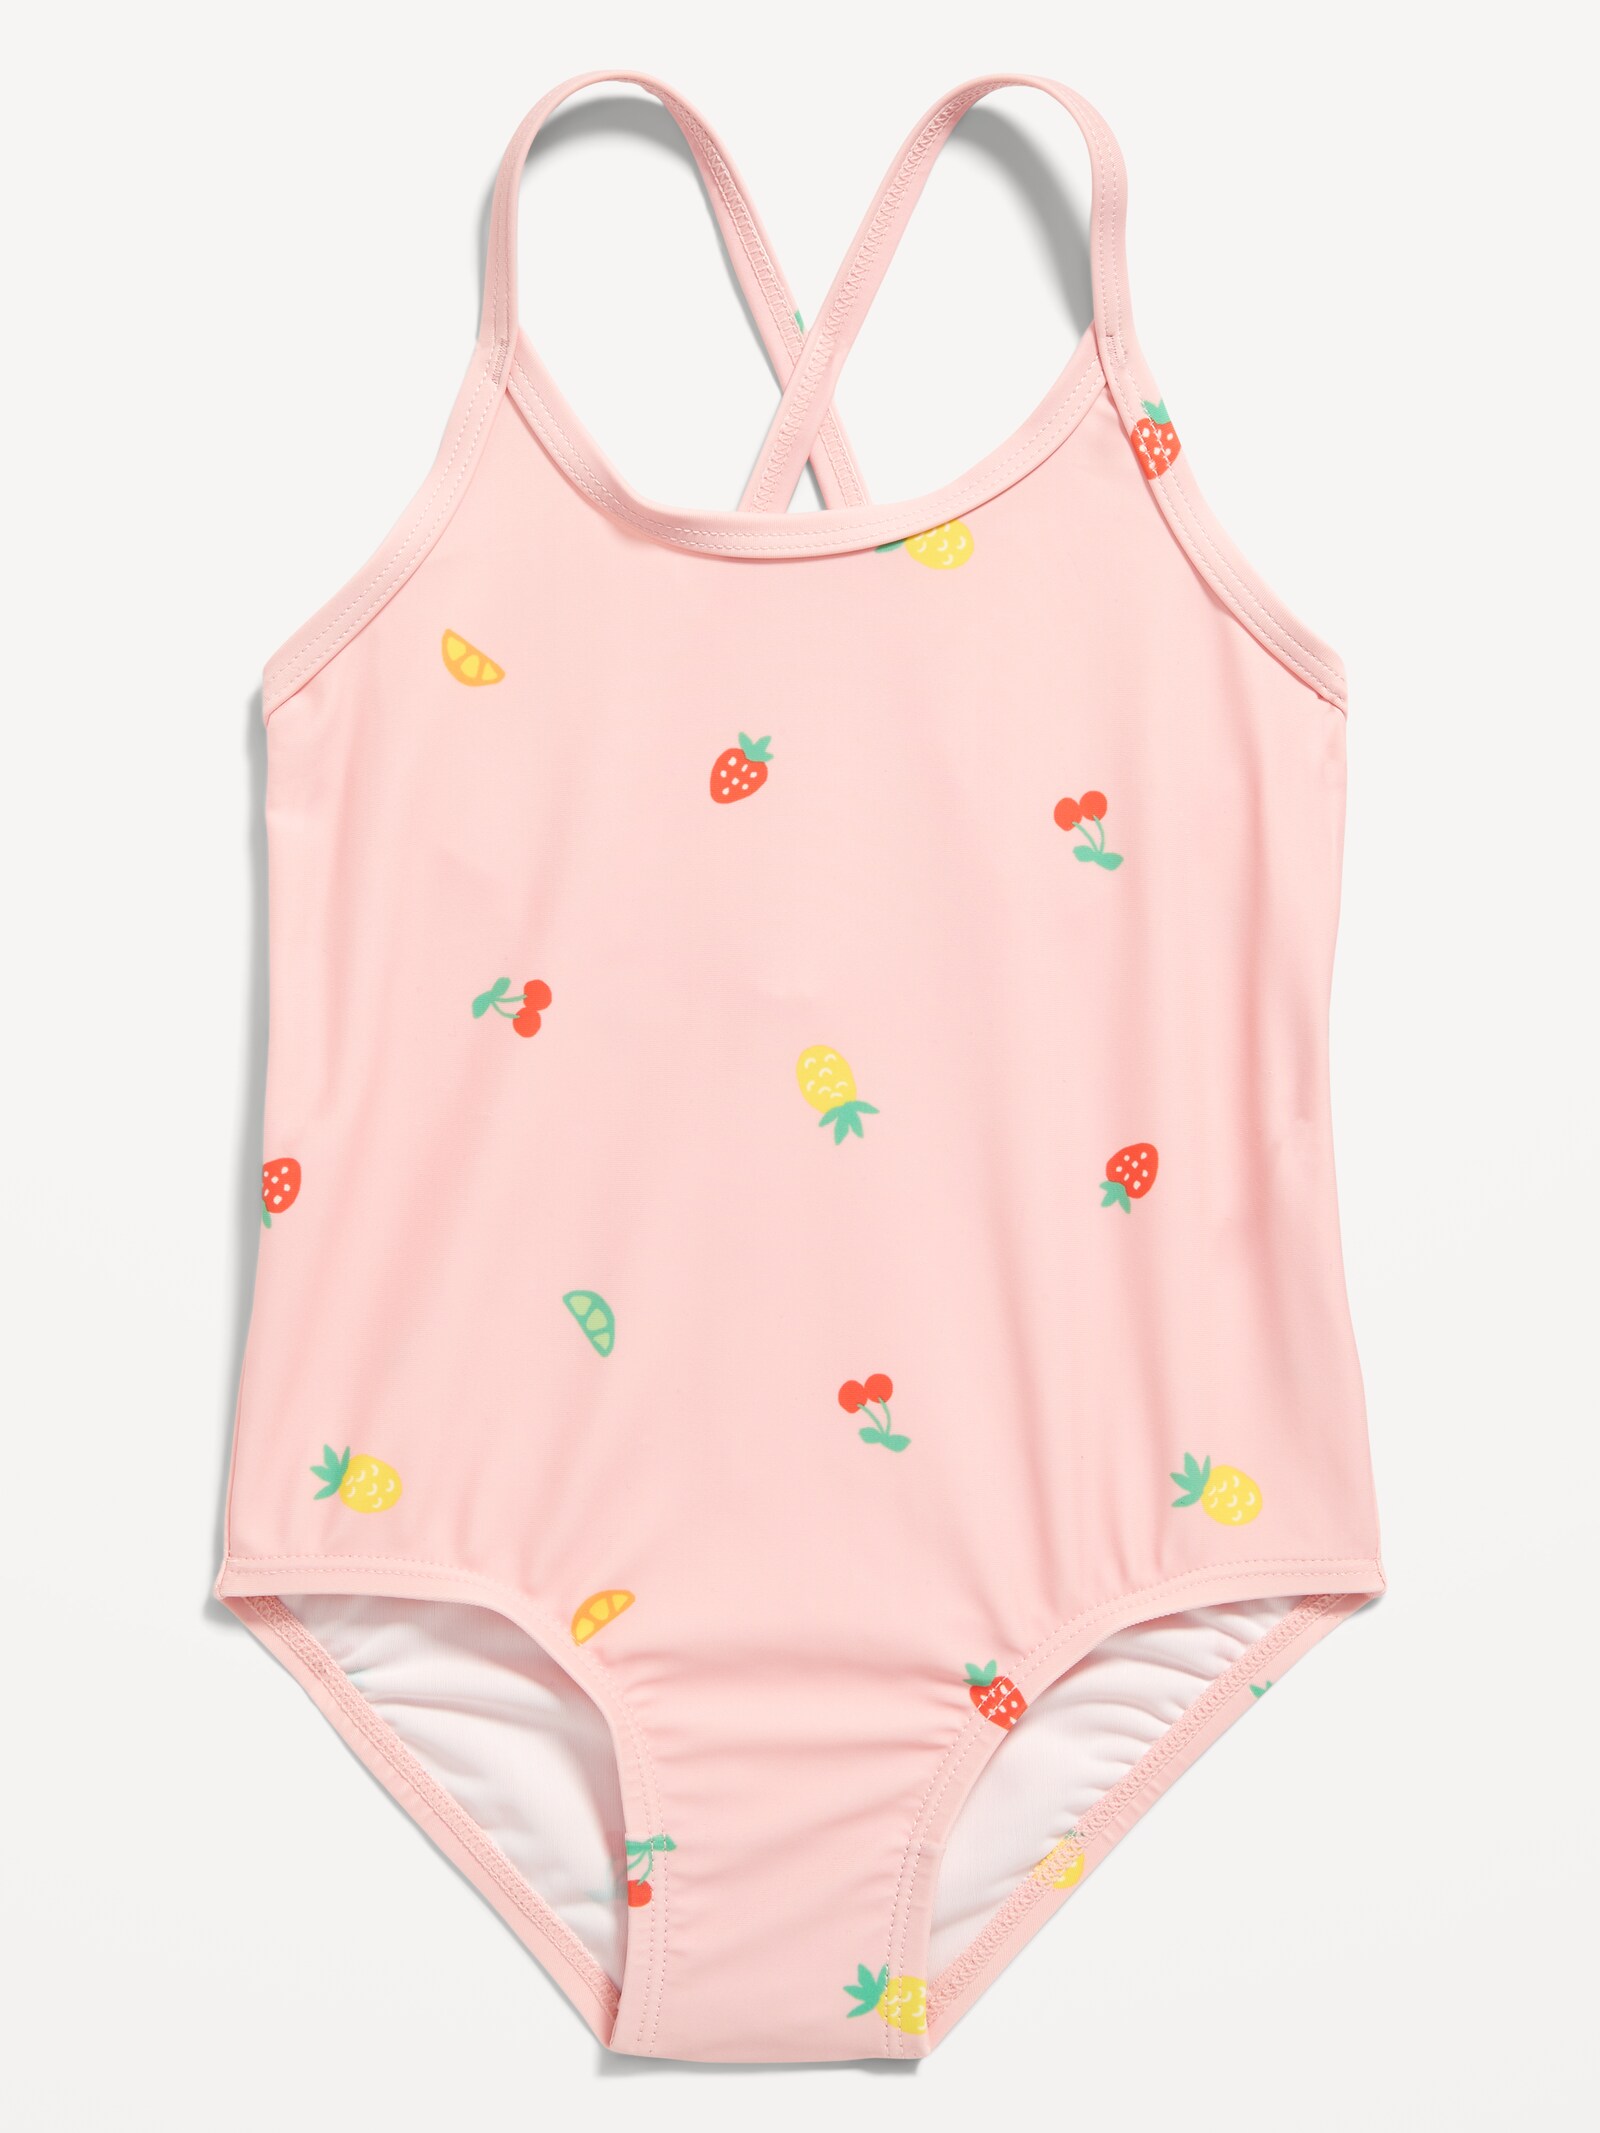 Details about   New Old Navy Girls Swimsuit Baby Toddler One-Piece NWOT Size 18-24 Months 